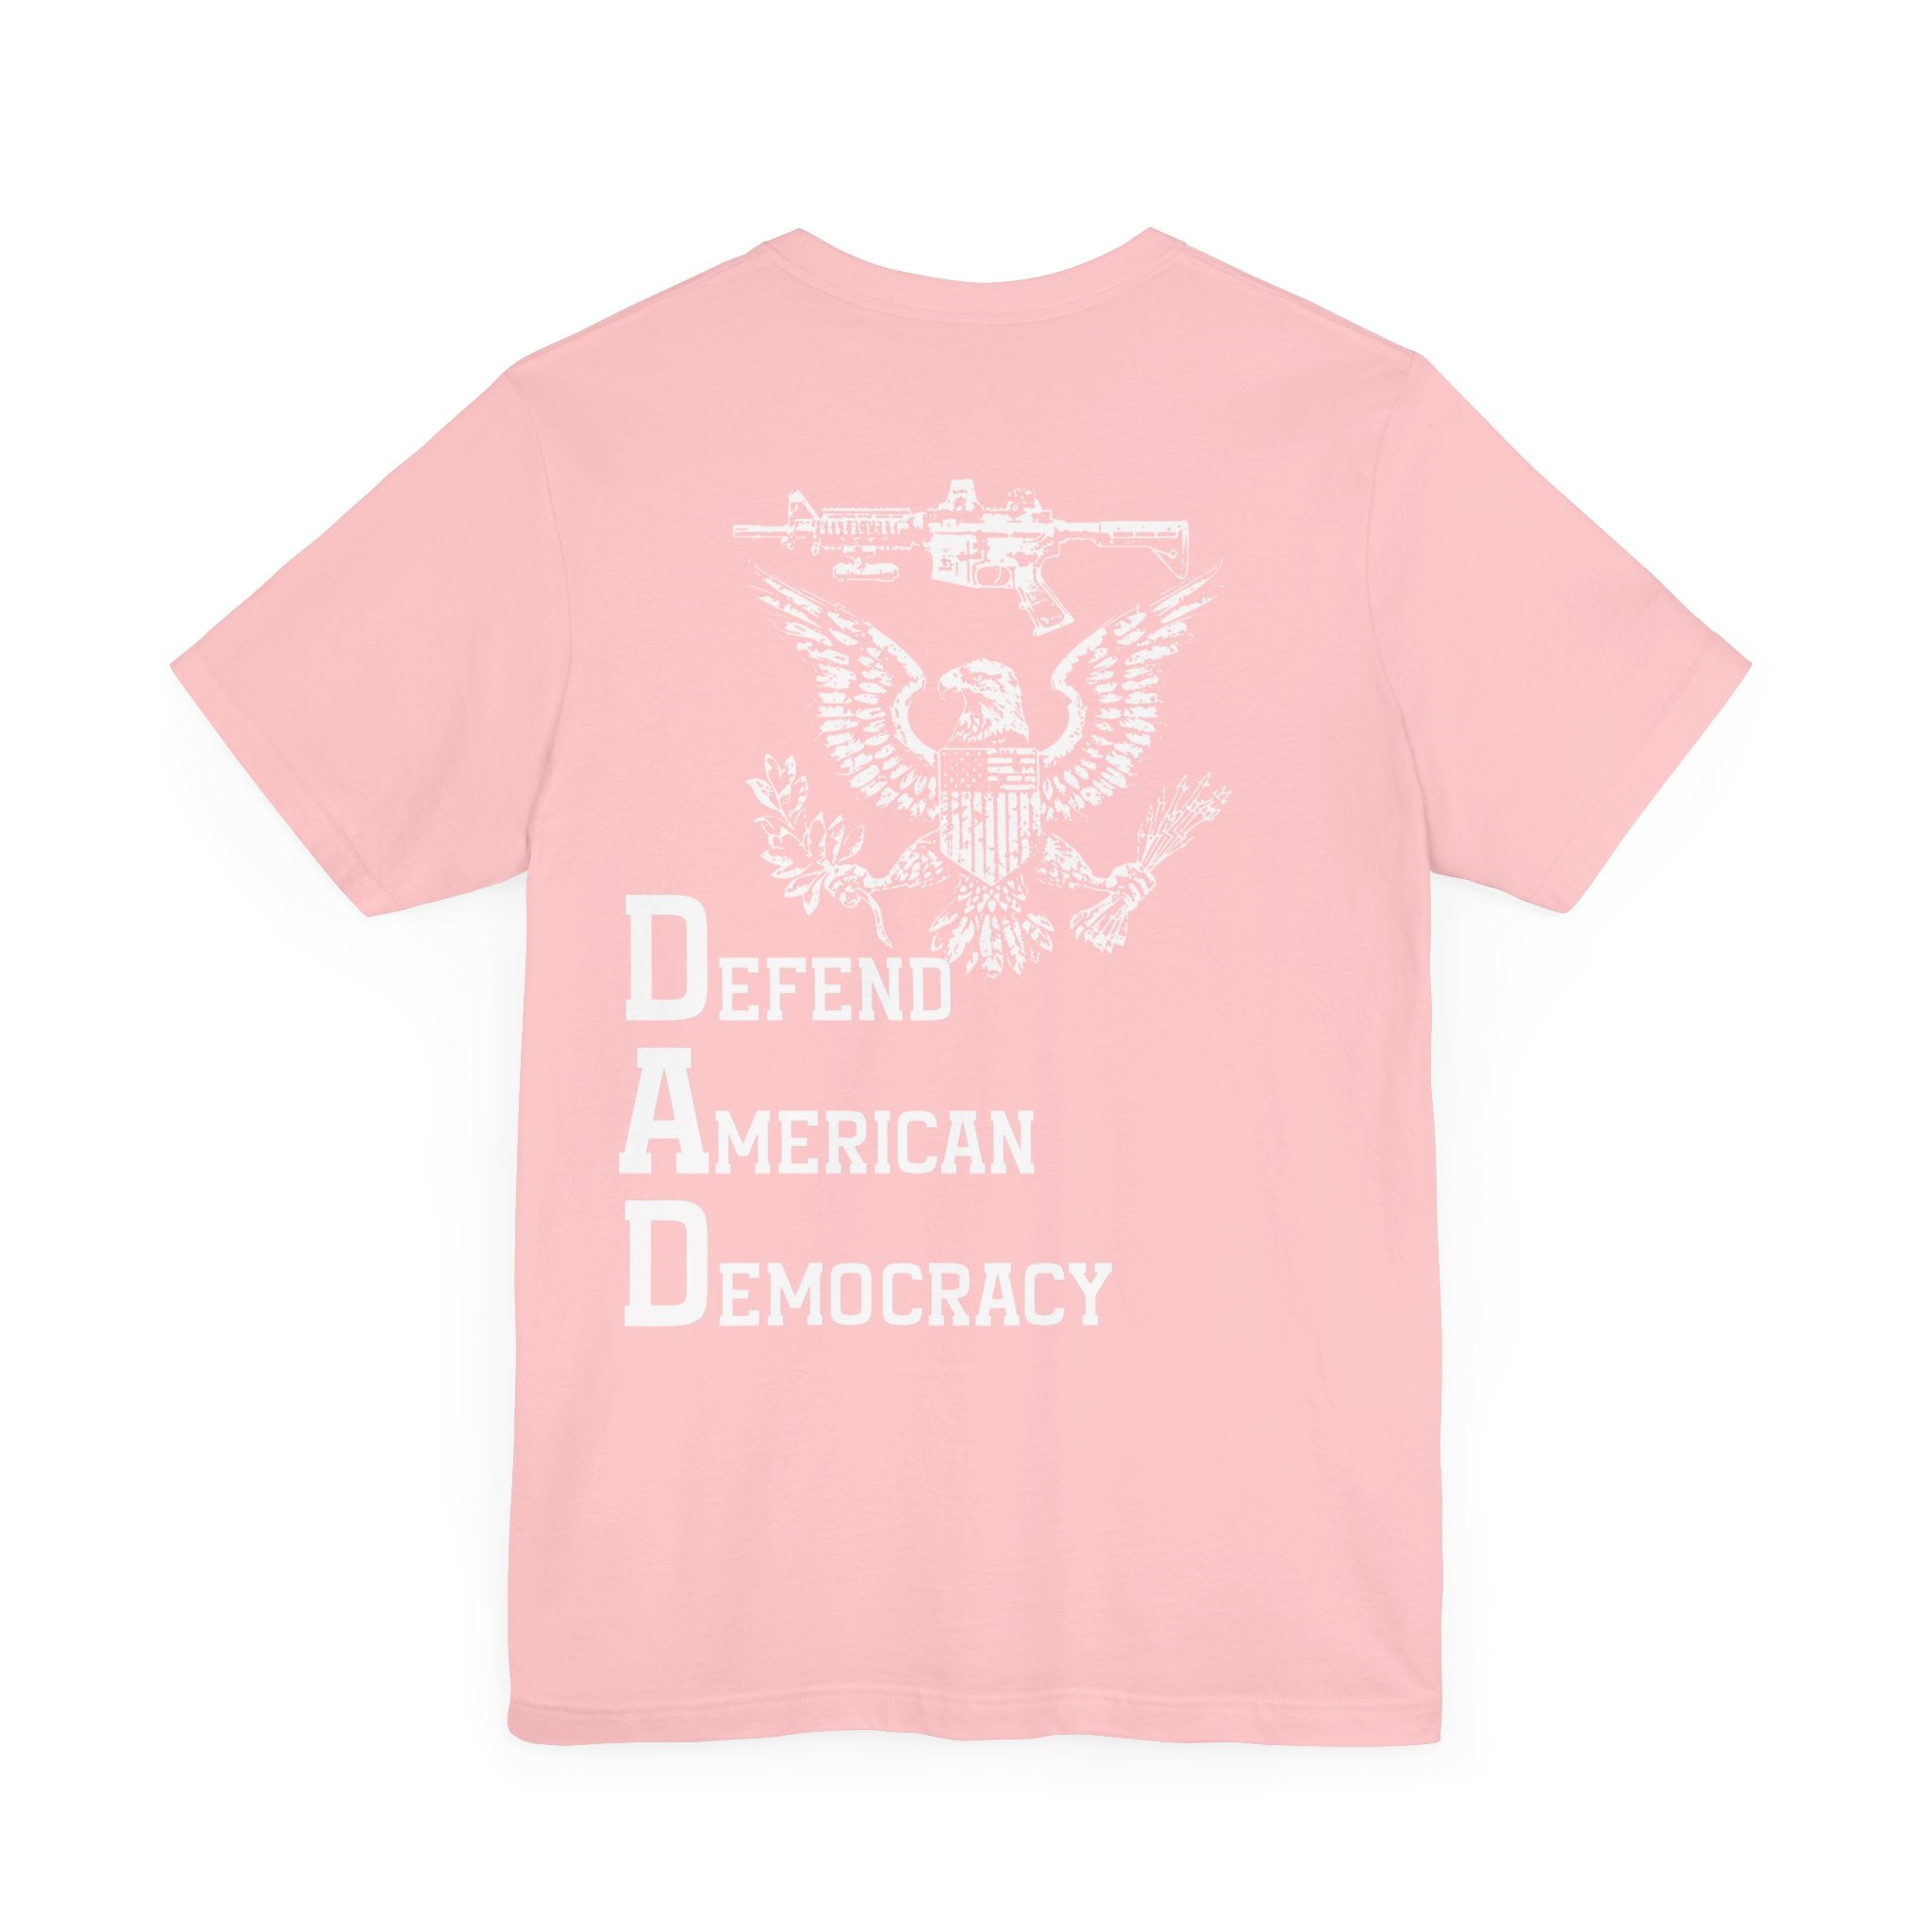 Defend American Democracy T-Shirt, Patriotic Eagle and Rifle Tee, Bold Statement Military Style Shirt, Pro-Democracy USA Apparel